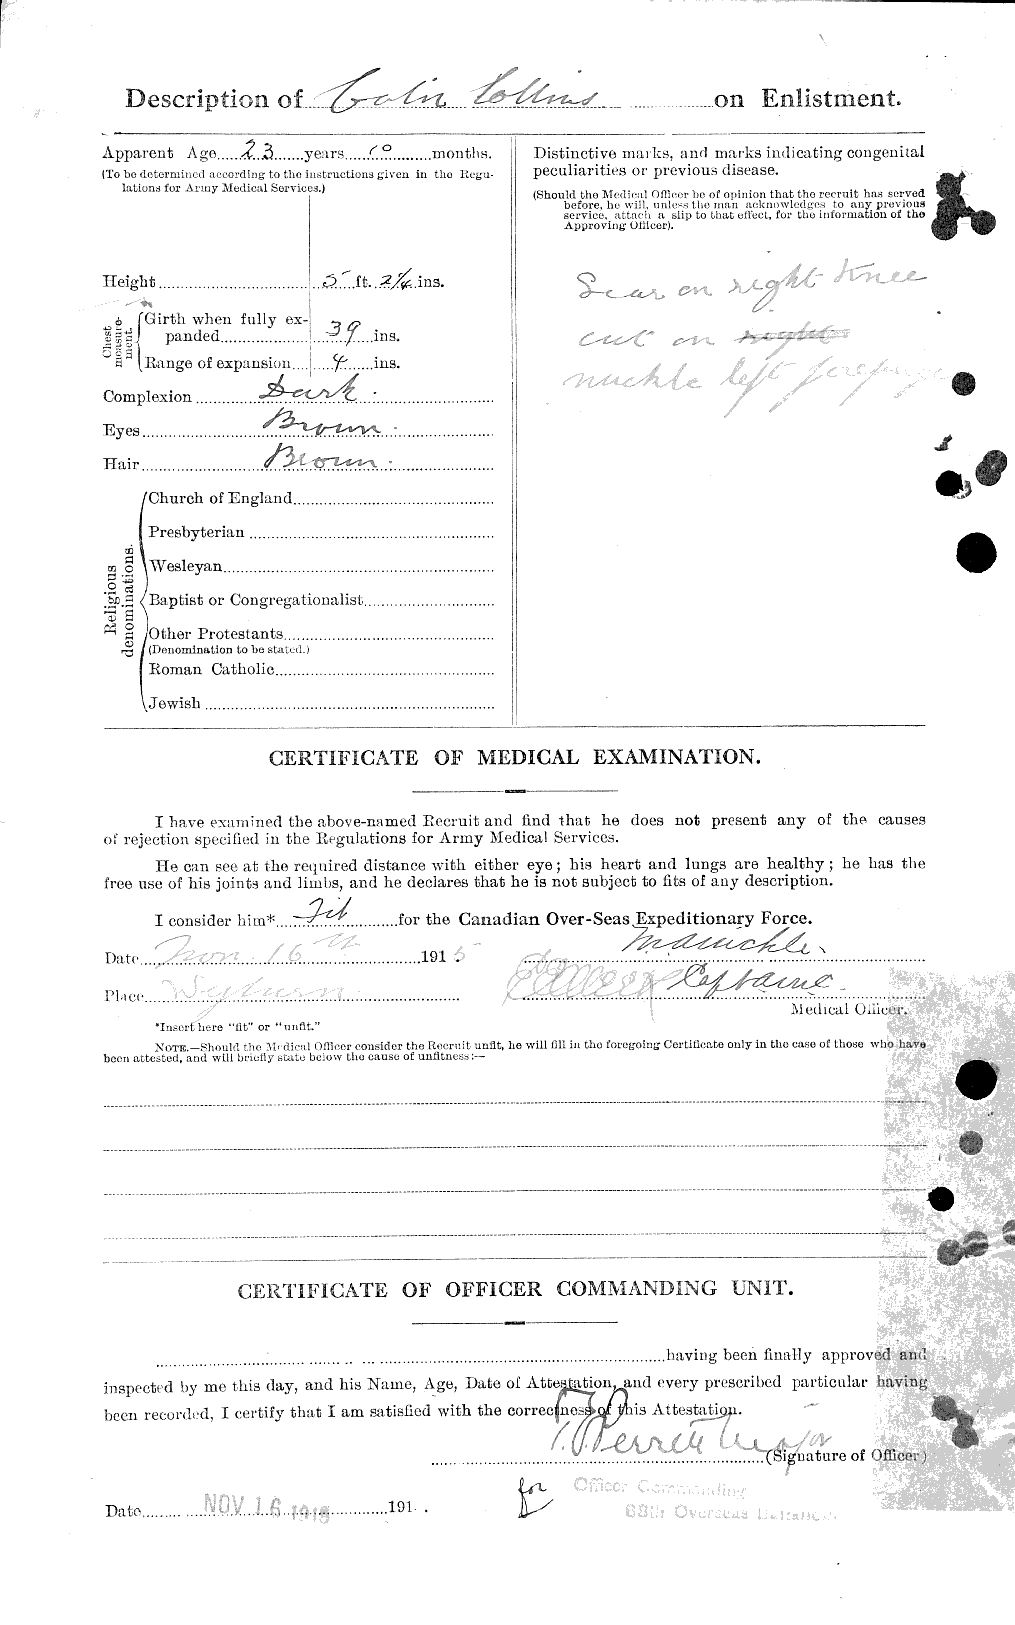 Personnel Records of the First World War - CEF 029057b